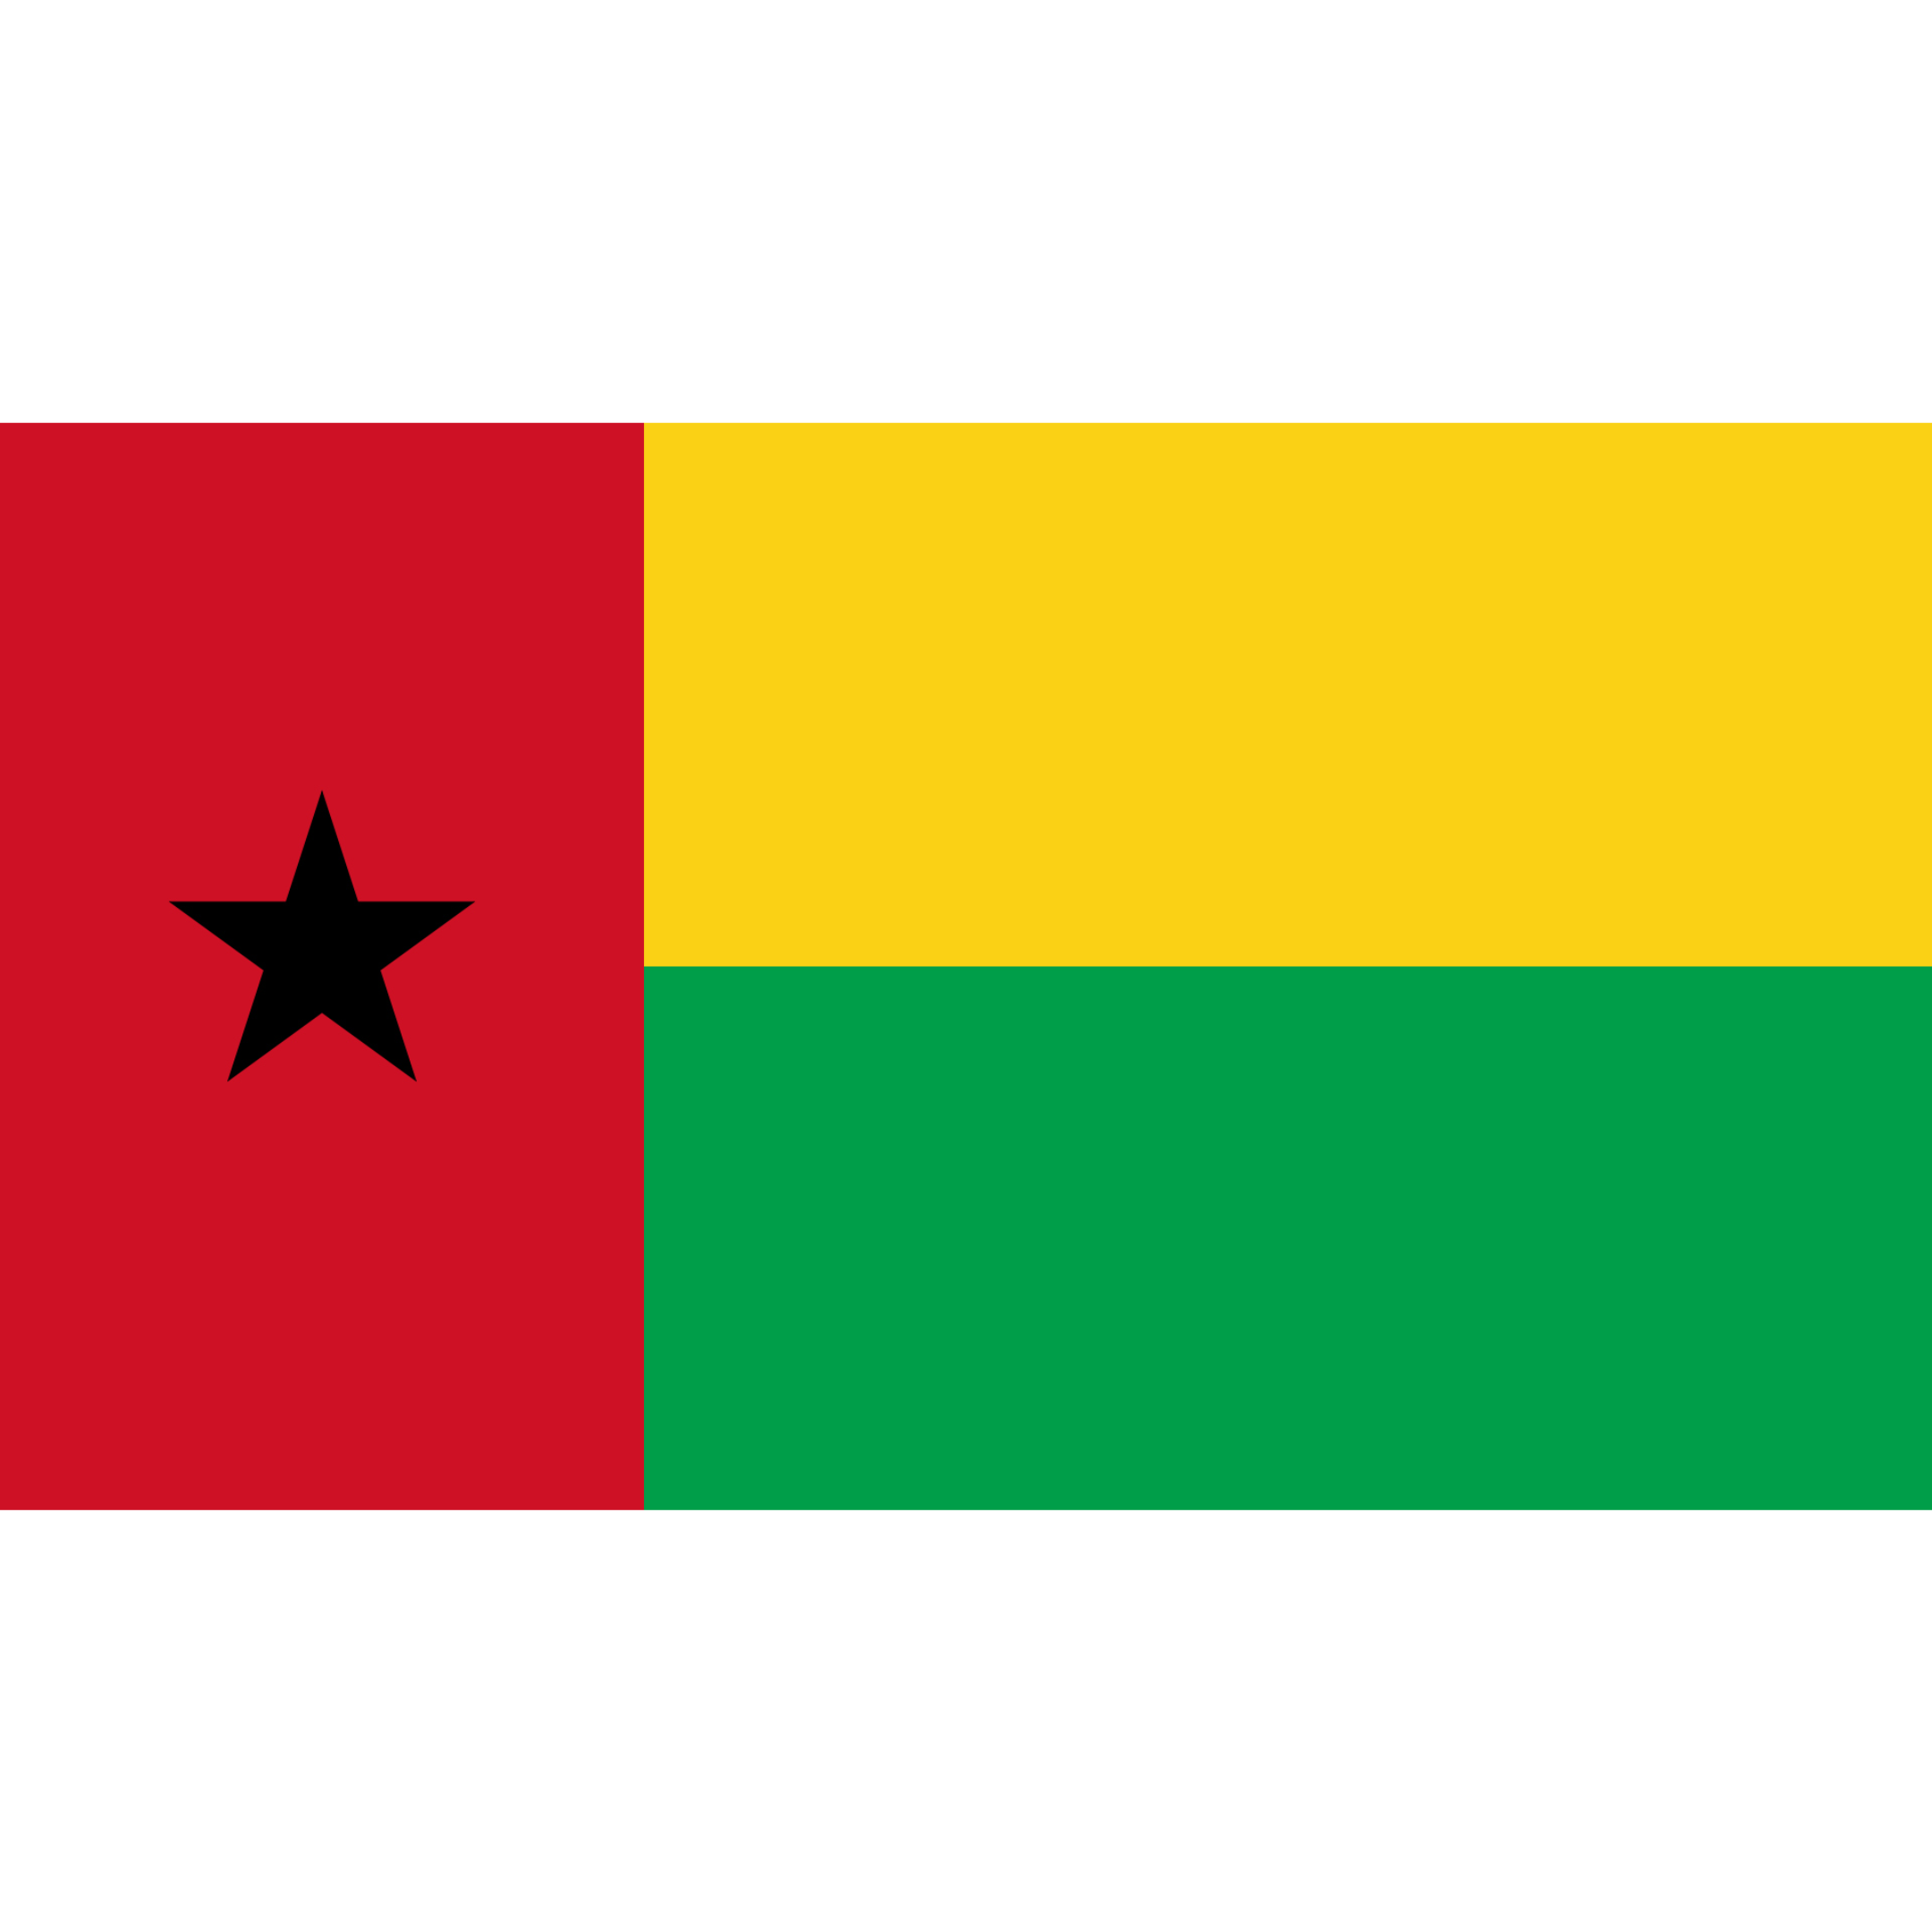 The Guinea-Bissau flag has a vertical red band with a black star and 2 horizontal yellow and green bands on the right.